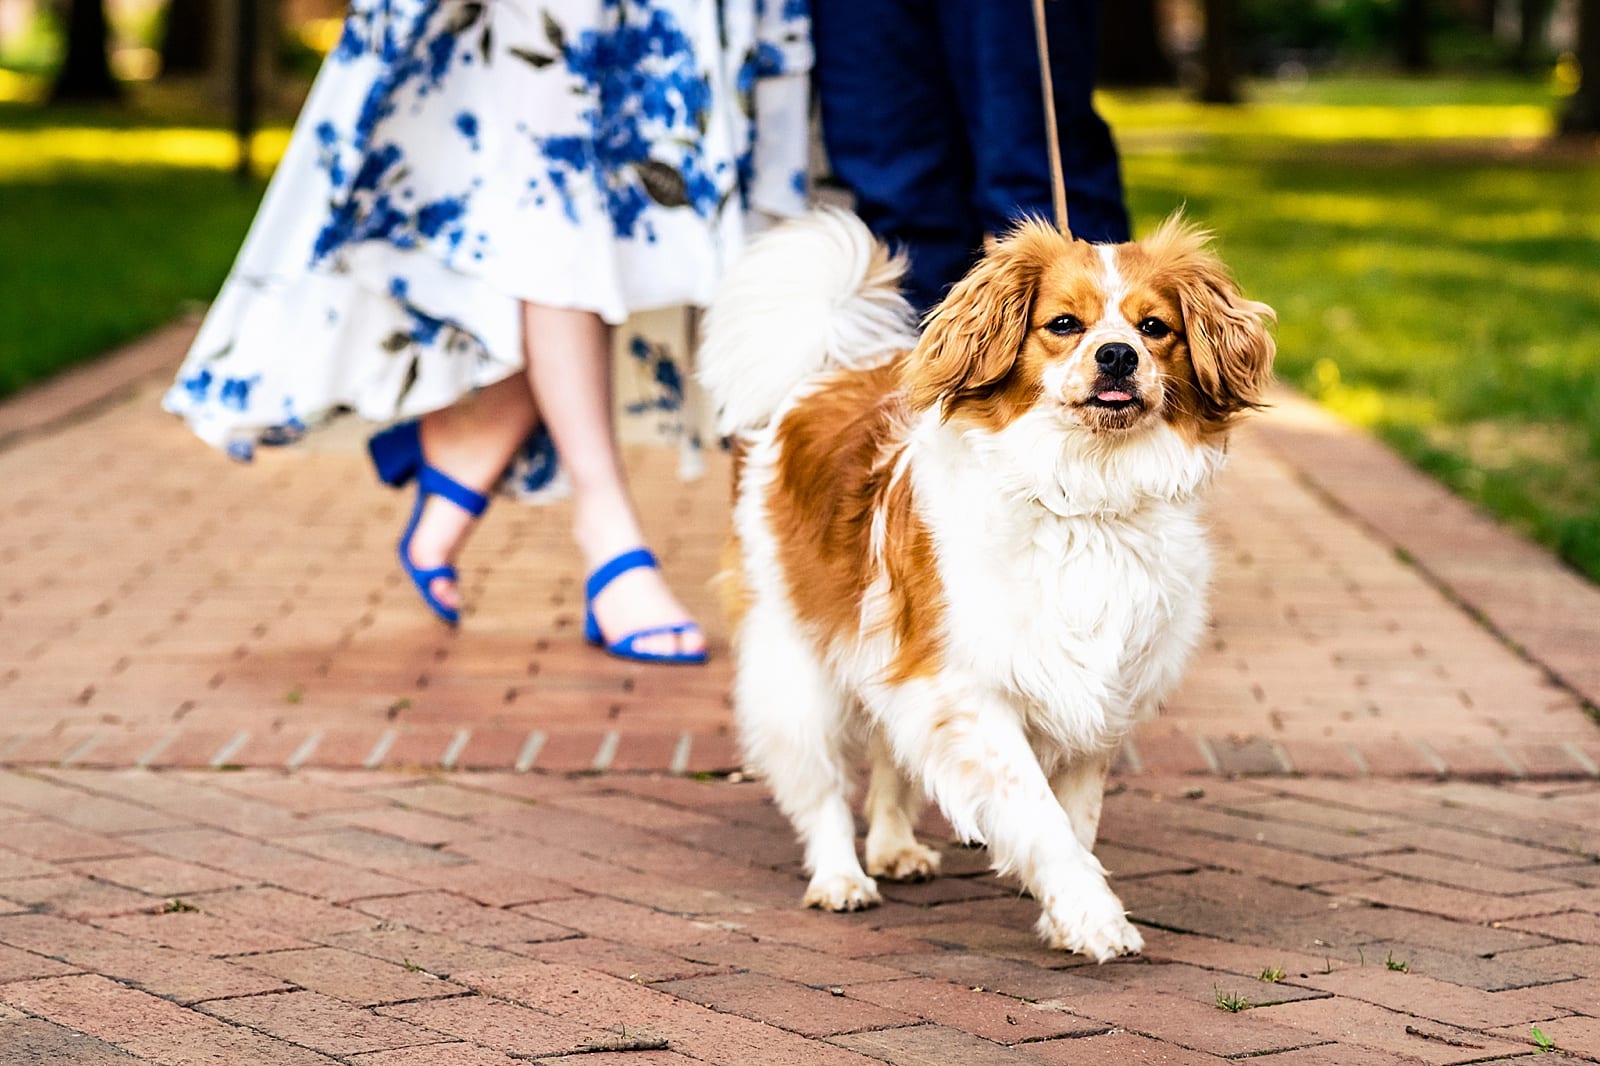 Bring your dog to your engagement session! | Kivus & Camera